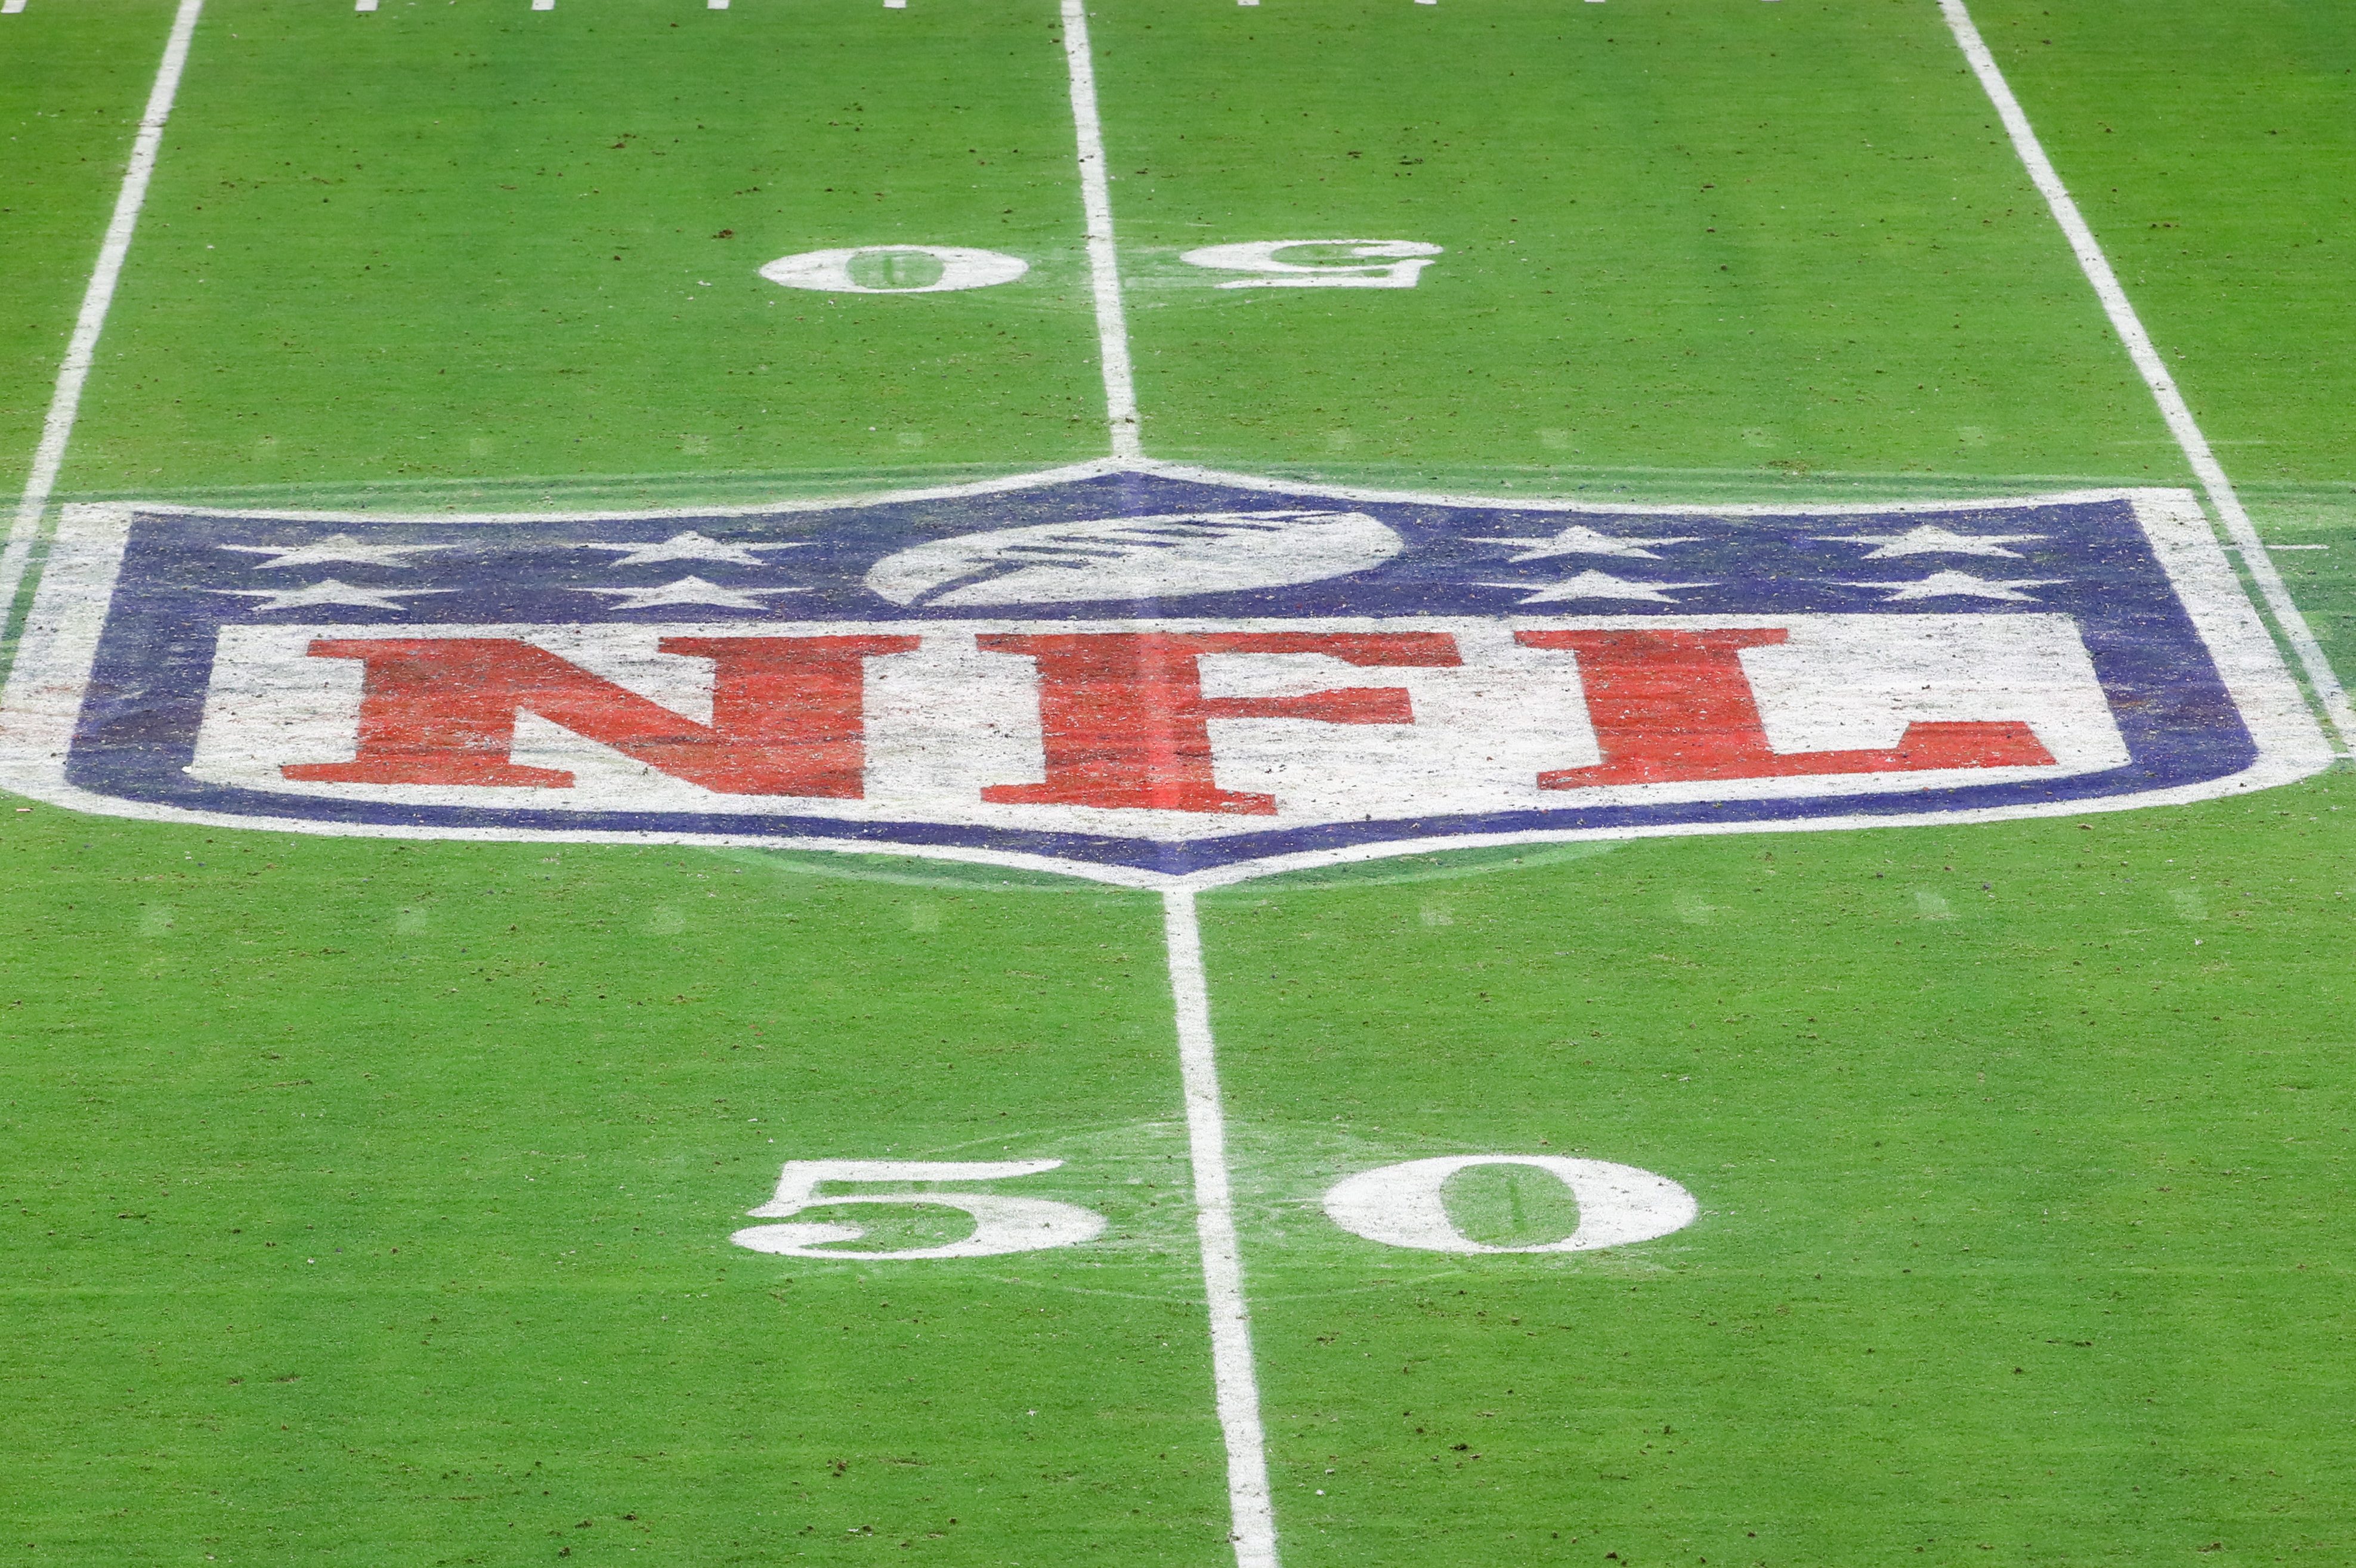 The NFL logo on the field of State Farm Stadium in. Arizona.